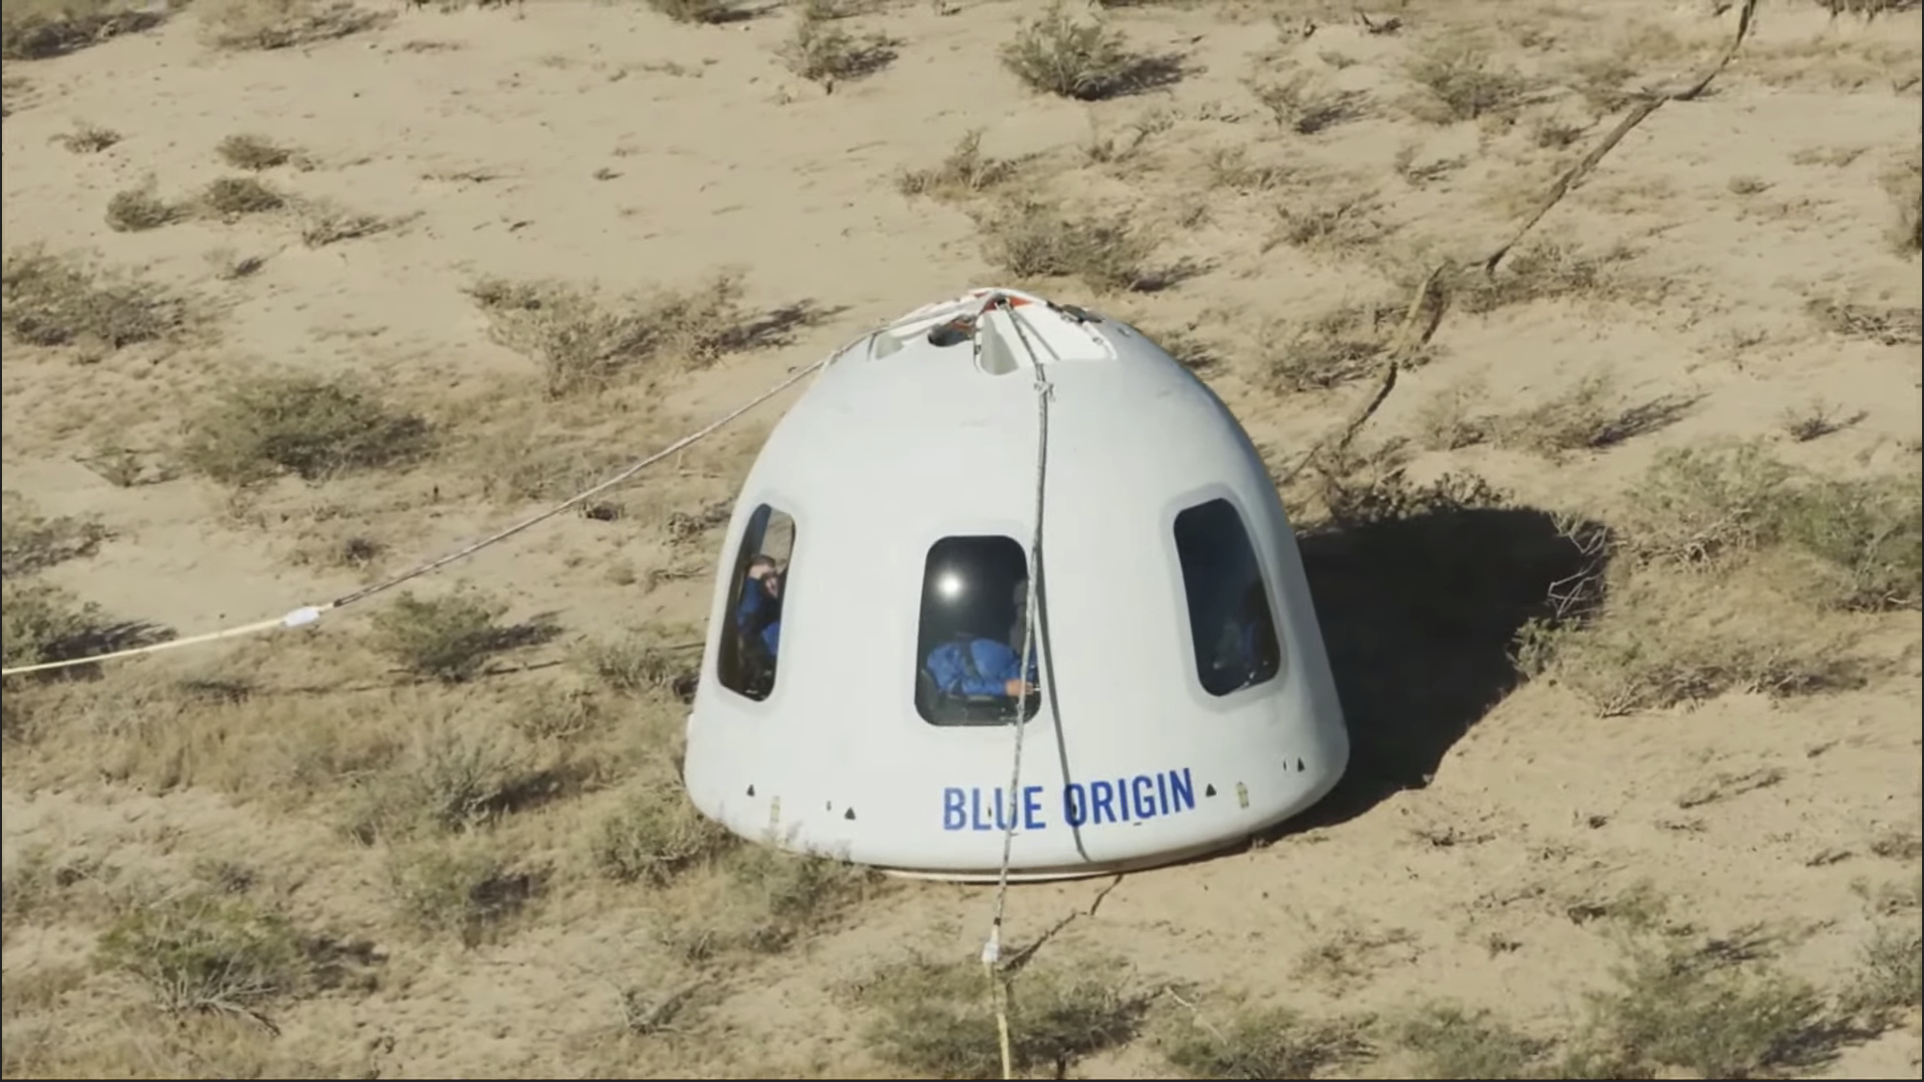 capsule-carrying-crew-returns-to-earth